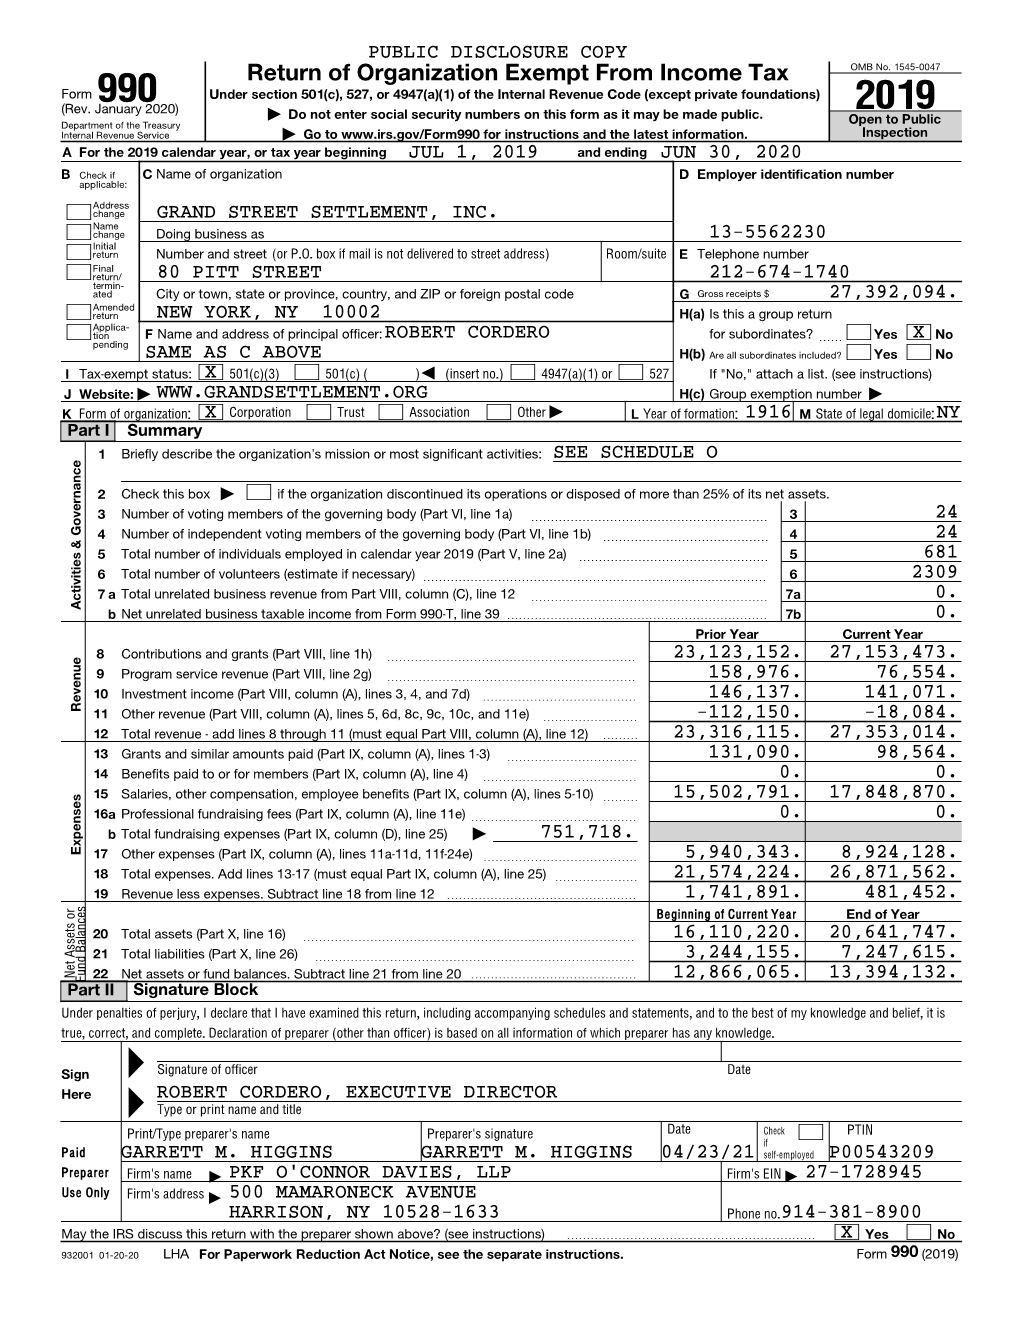 IRS FORM 990 Year Ending June 30, 2020